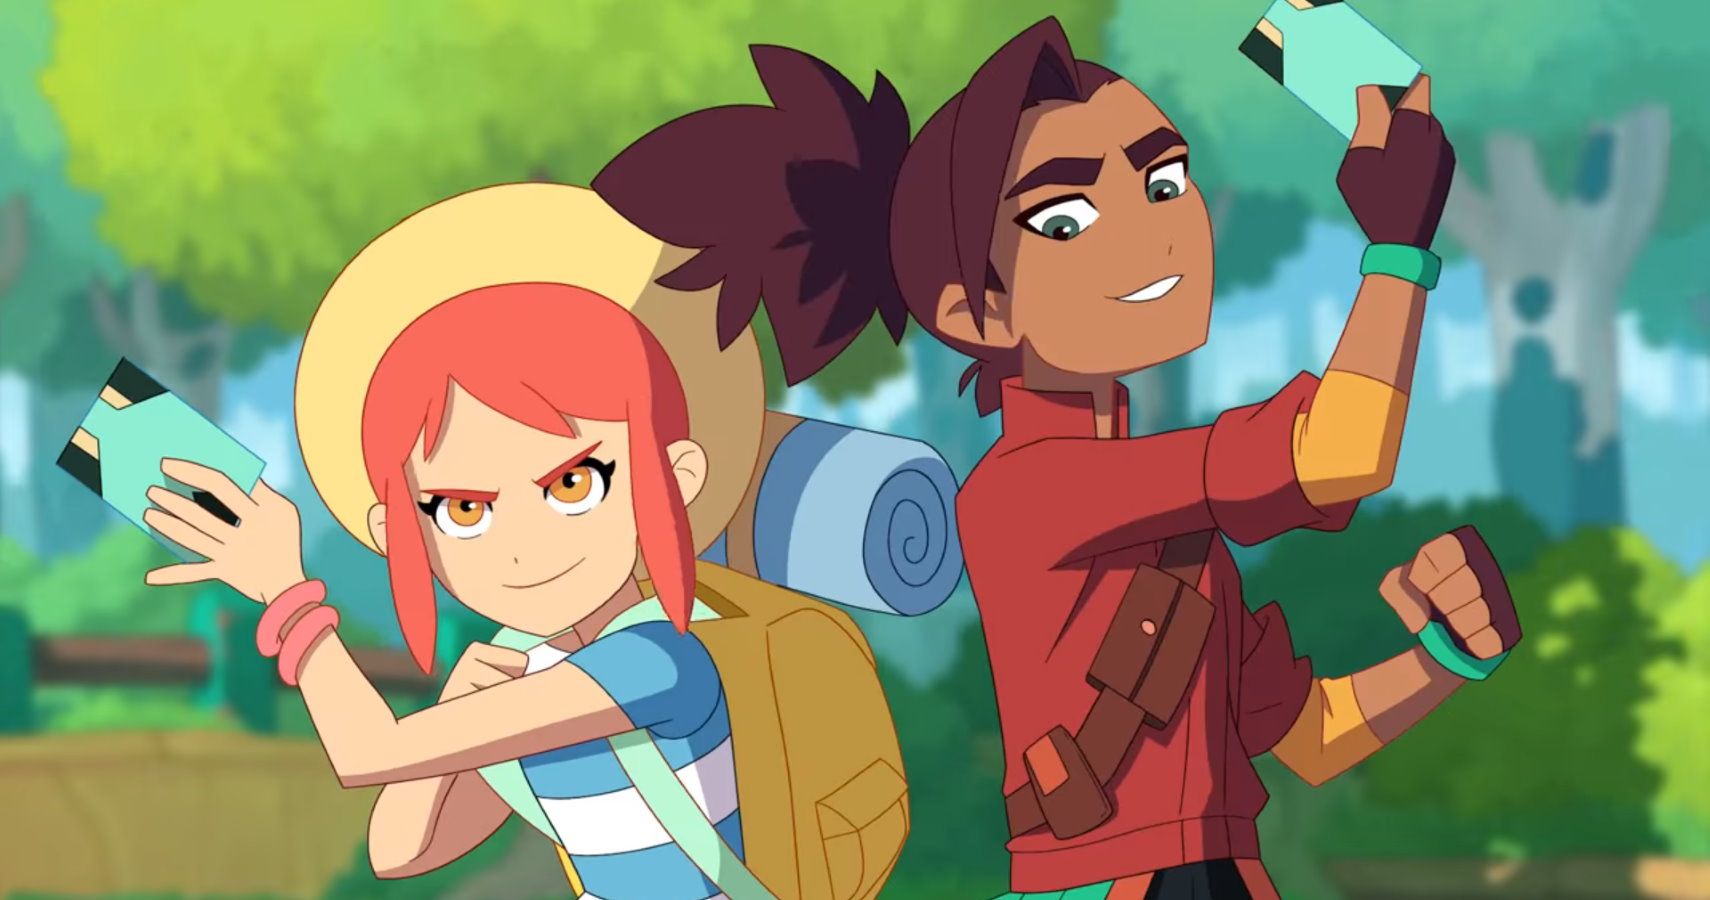 Temtem Developer Says The Servers Can Now Keep Up With Demand